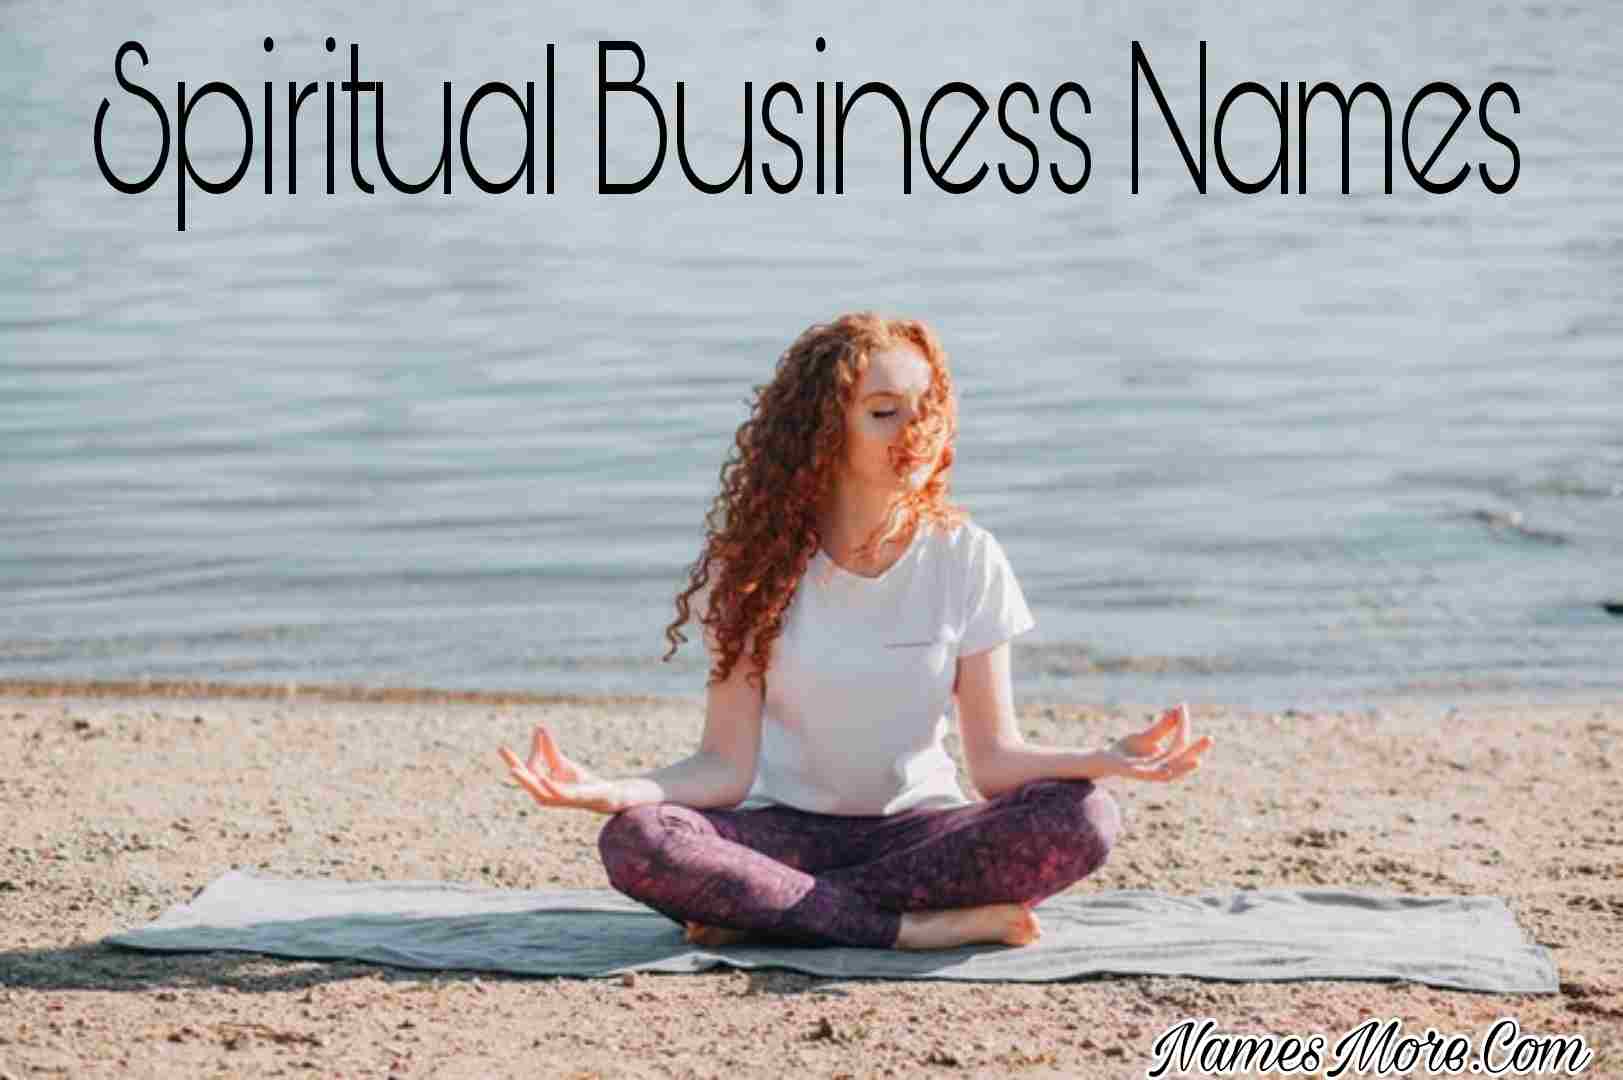 Featured Image for 990+ Spiritual Business Names [Ultimate Idea]